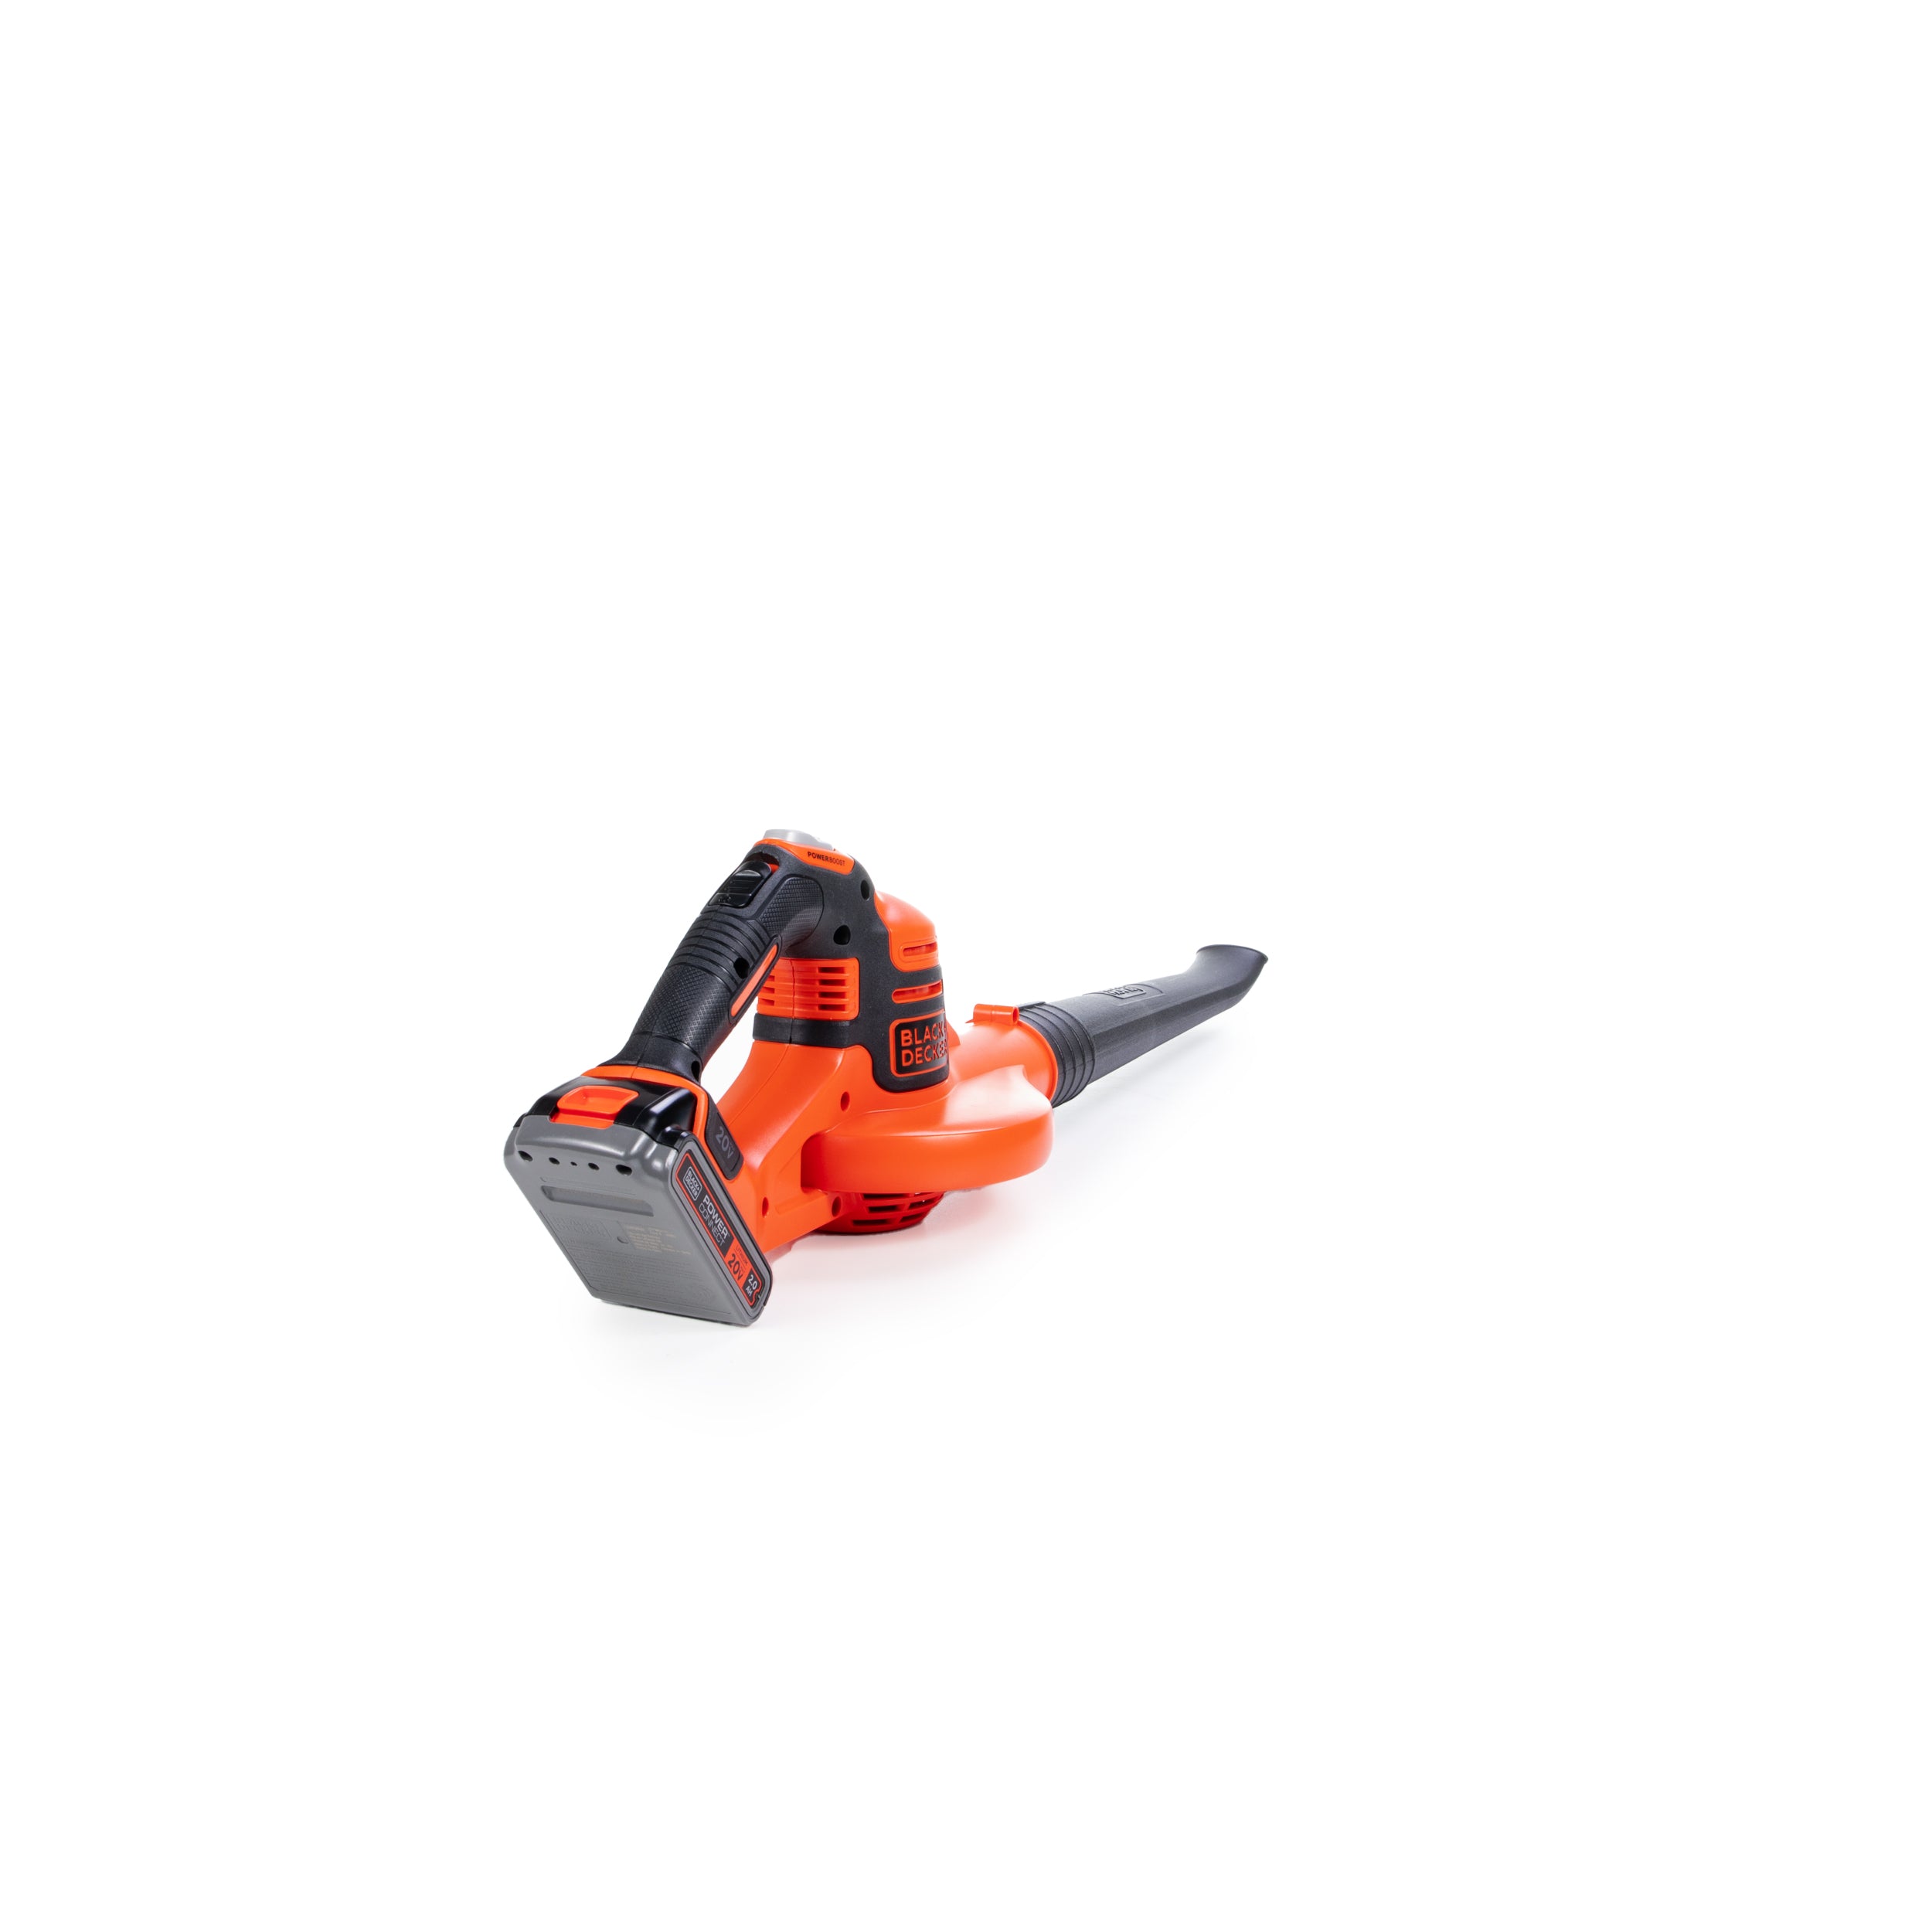  Decker LSW321 20V Max Lithium Powerboost Sweeper - Black